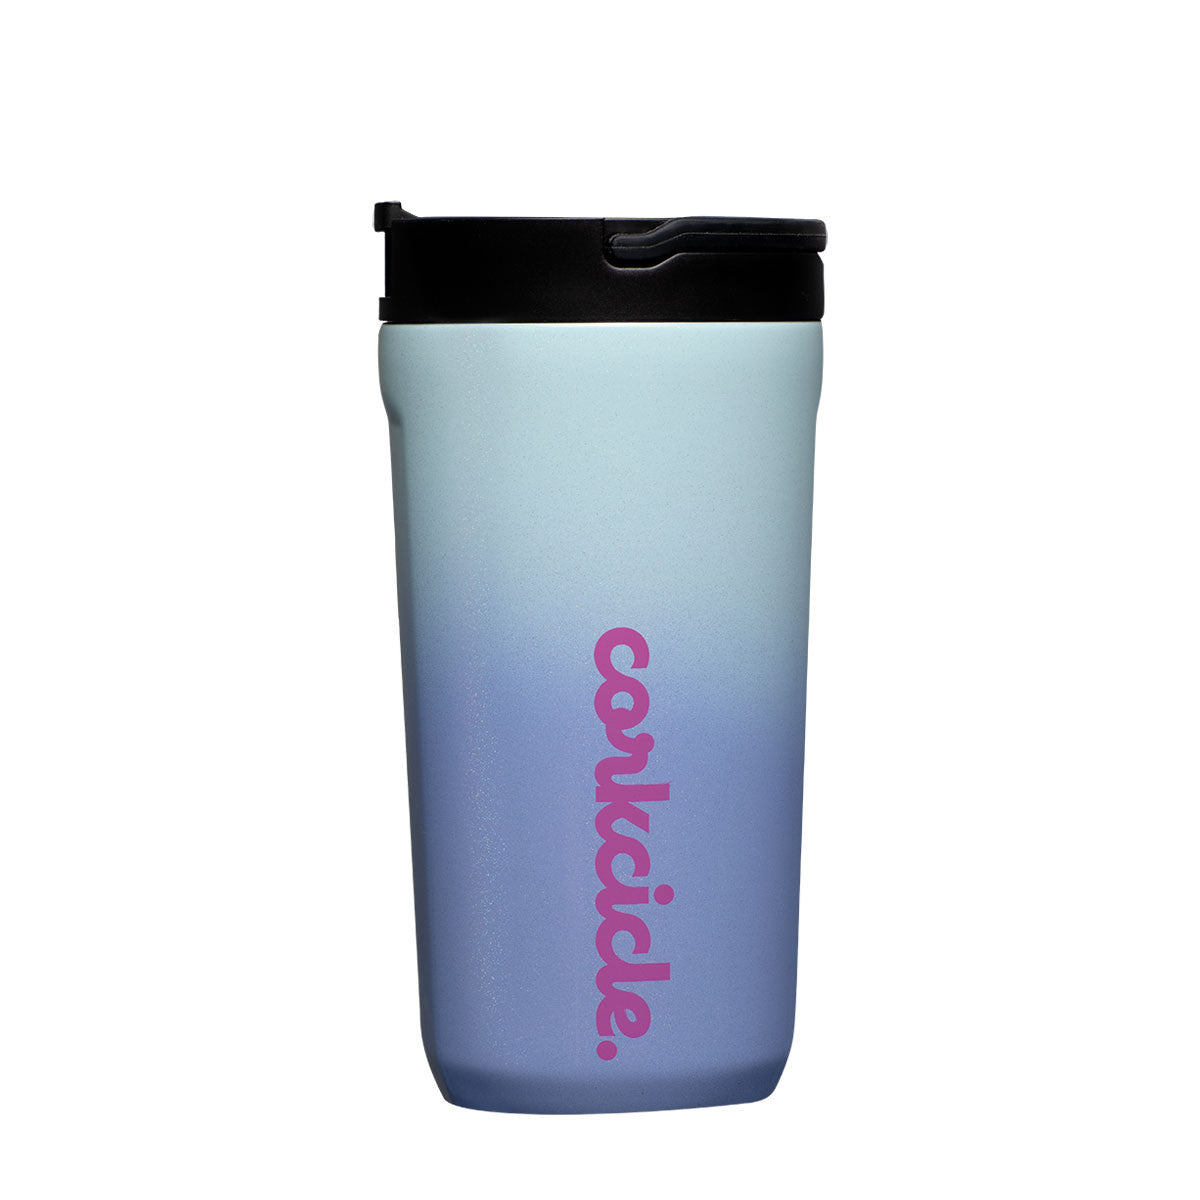 Ombre Ocean 12 oz Stainless Steel Kids Cup by Corkcicle